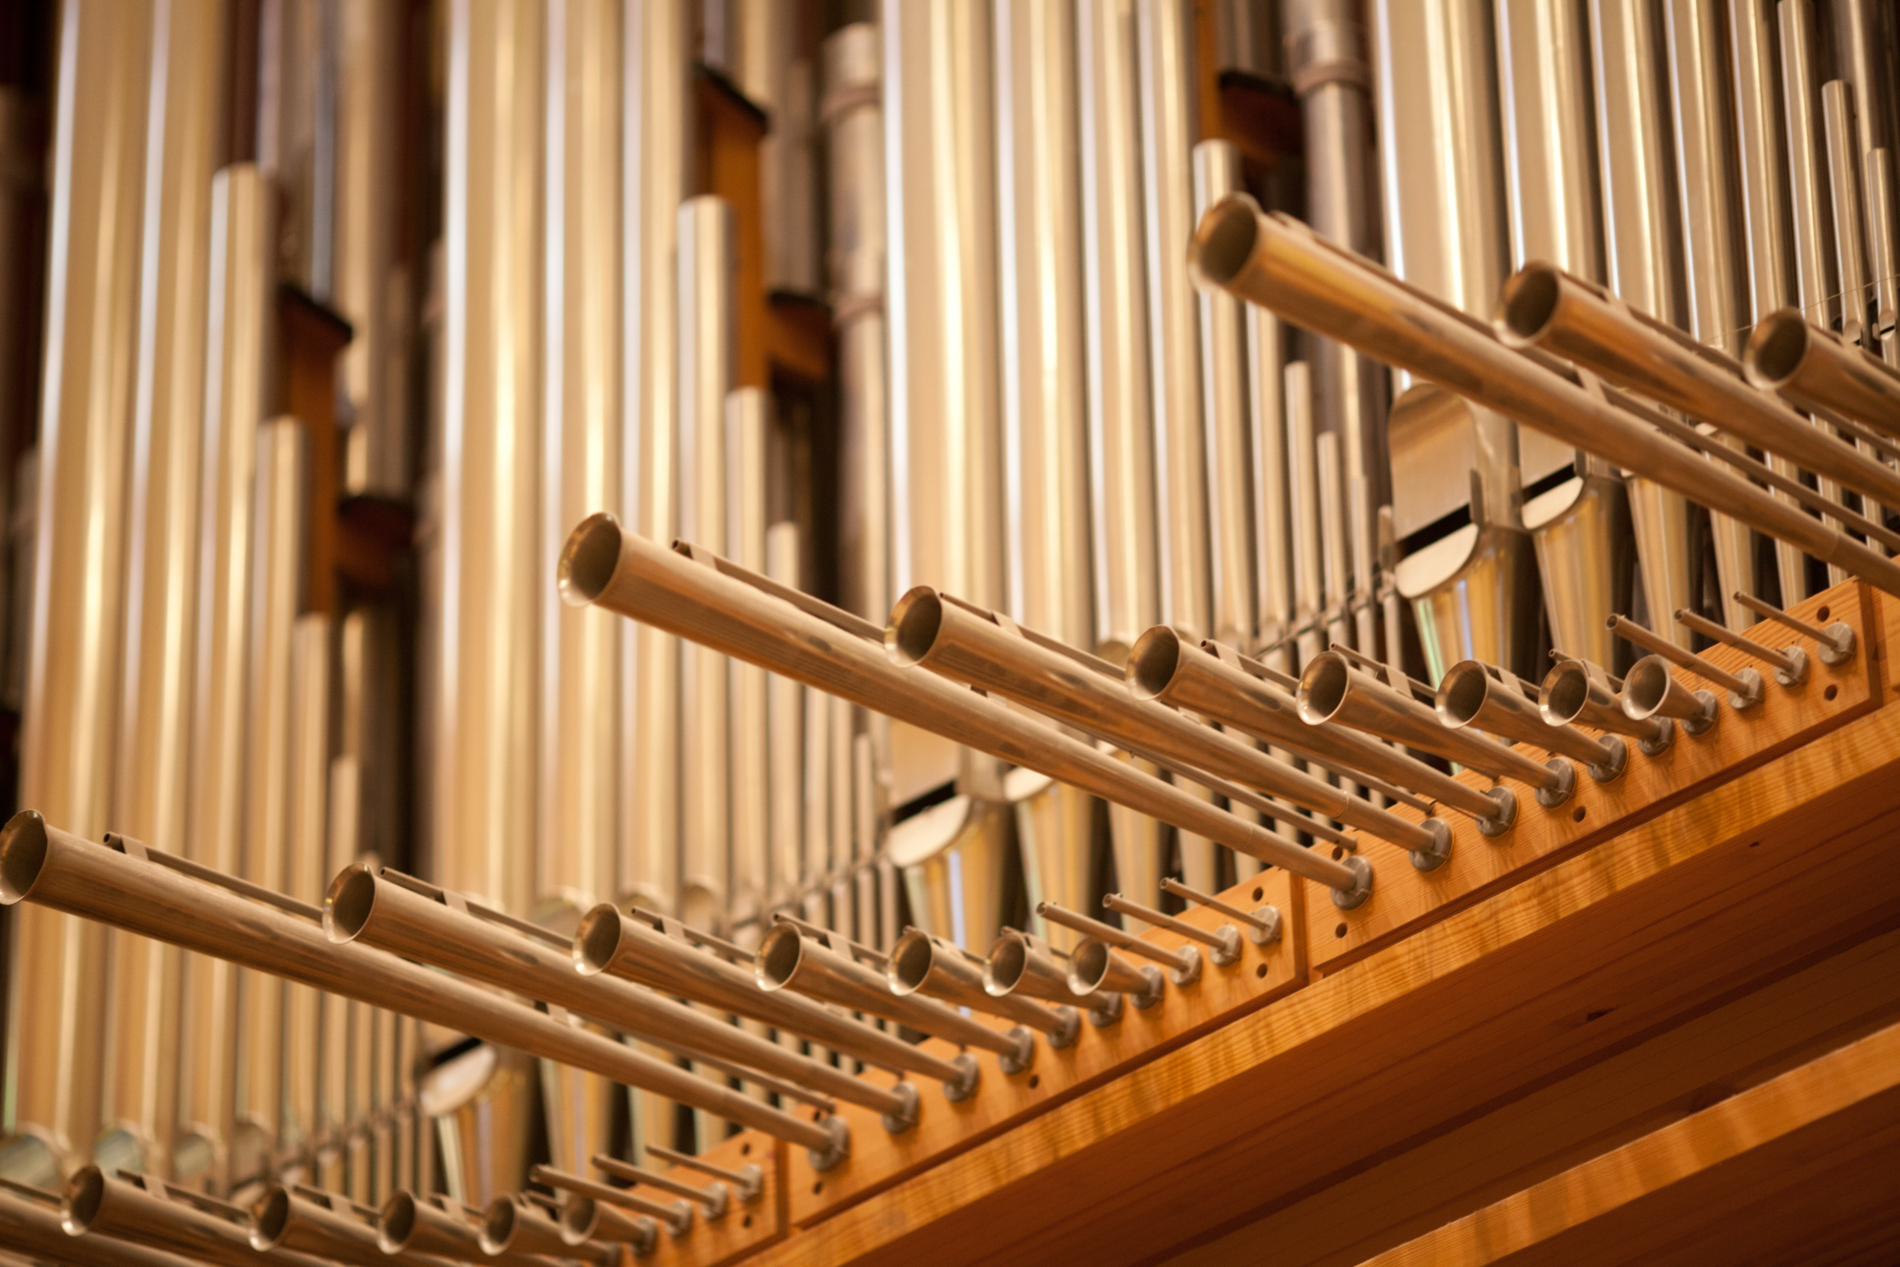 Trumpets and pipes on the First Church organ